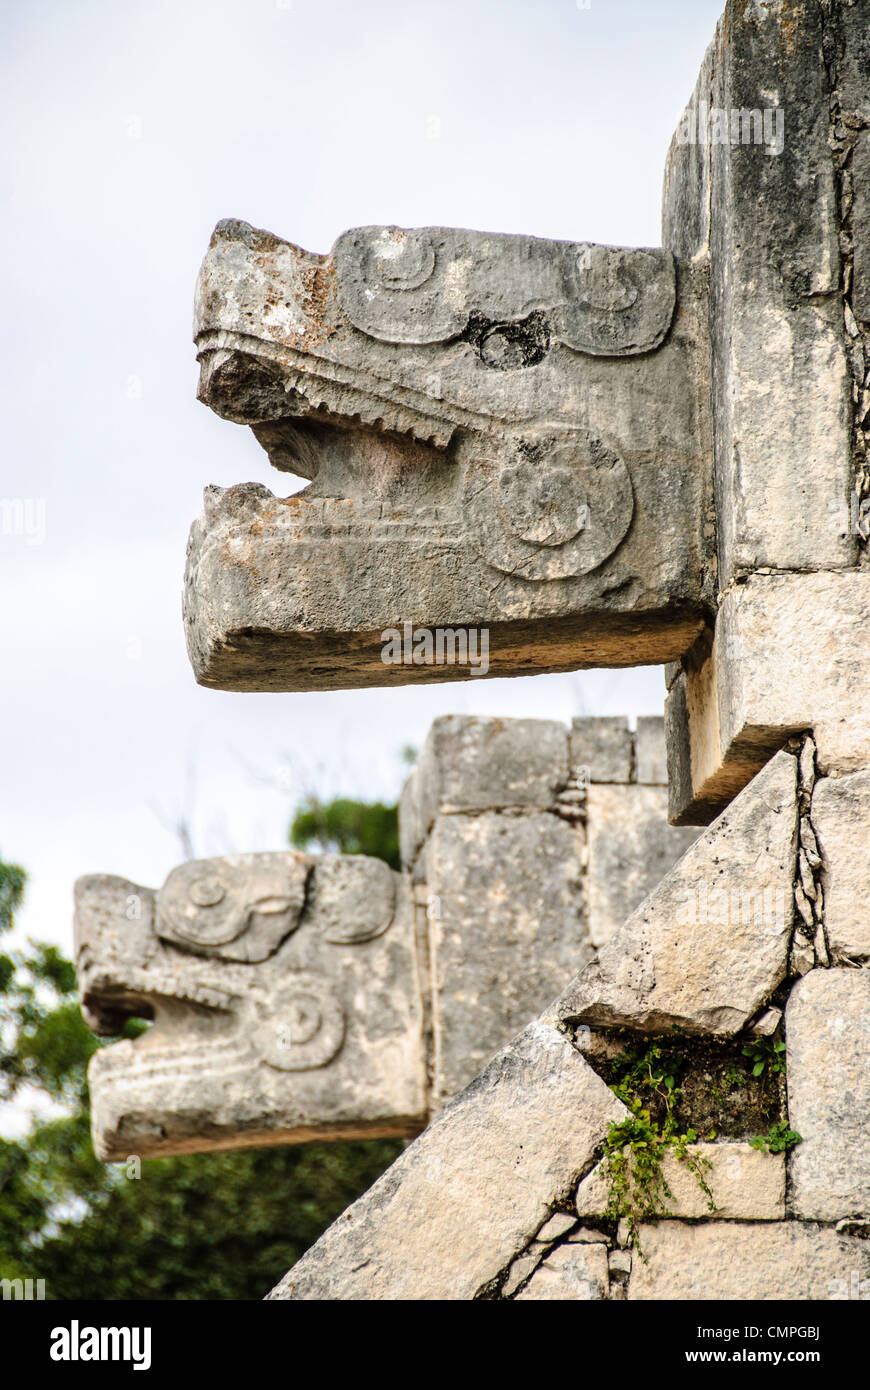 CHICHEN ITZA, Mexico - Carved jaguar heads adorning the buildings at Chichen Itza, Mexico. Stock Photo